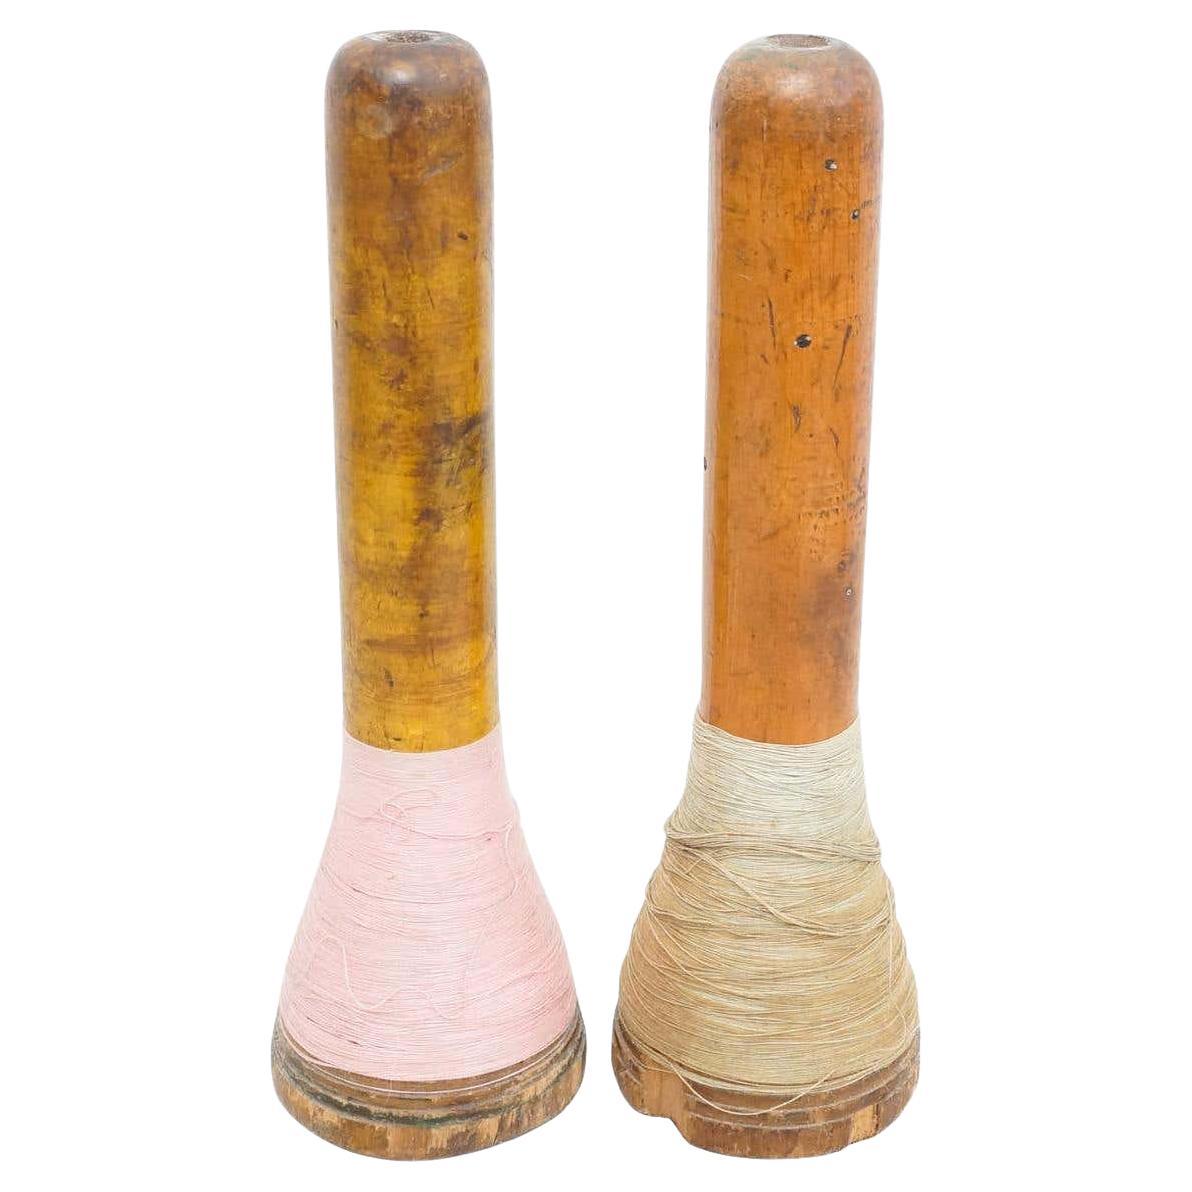 Set of Two Rustic Wooden Spools of Thread, circa 1930